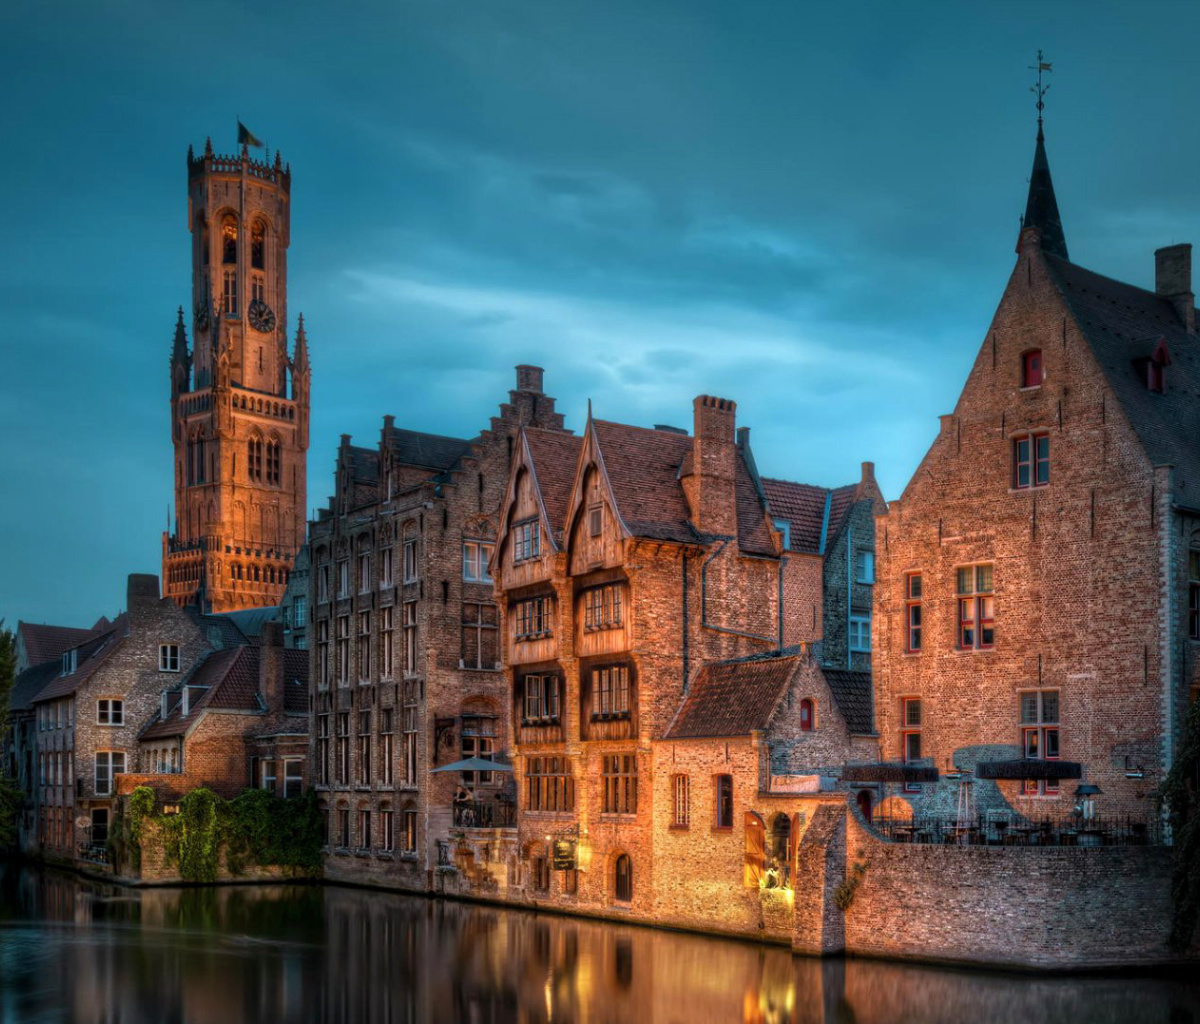 Bruges city on canal screenshot #1 1200x1024